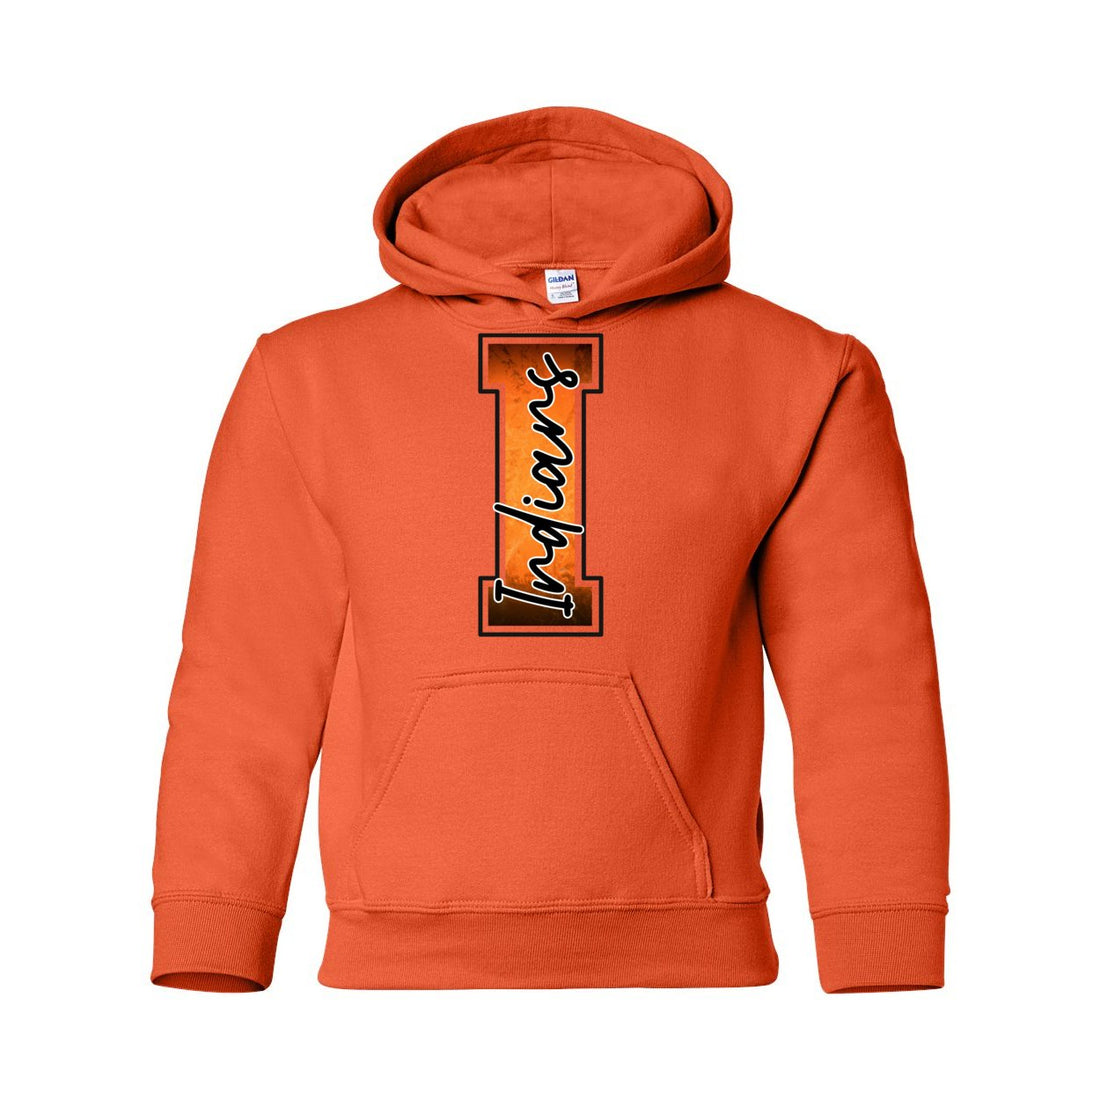 I Indians Youth Hooded Sweatshirt - Sweaters/Hoodies - Positively Sassy - I Indians Youth Hooded Sweatshirt